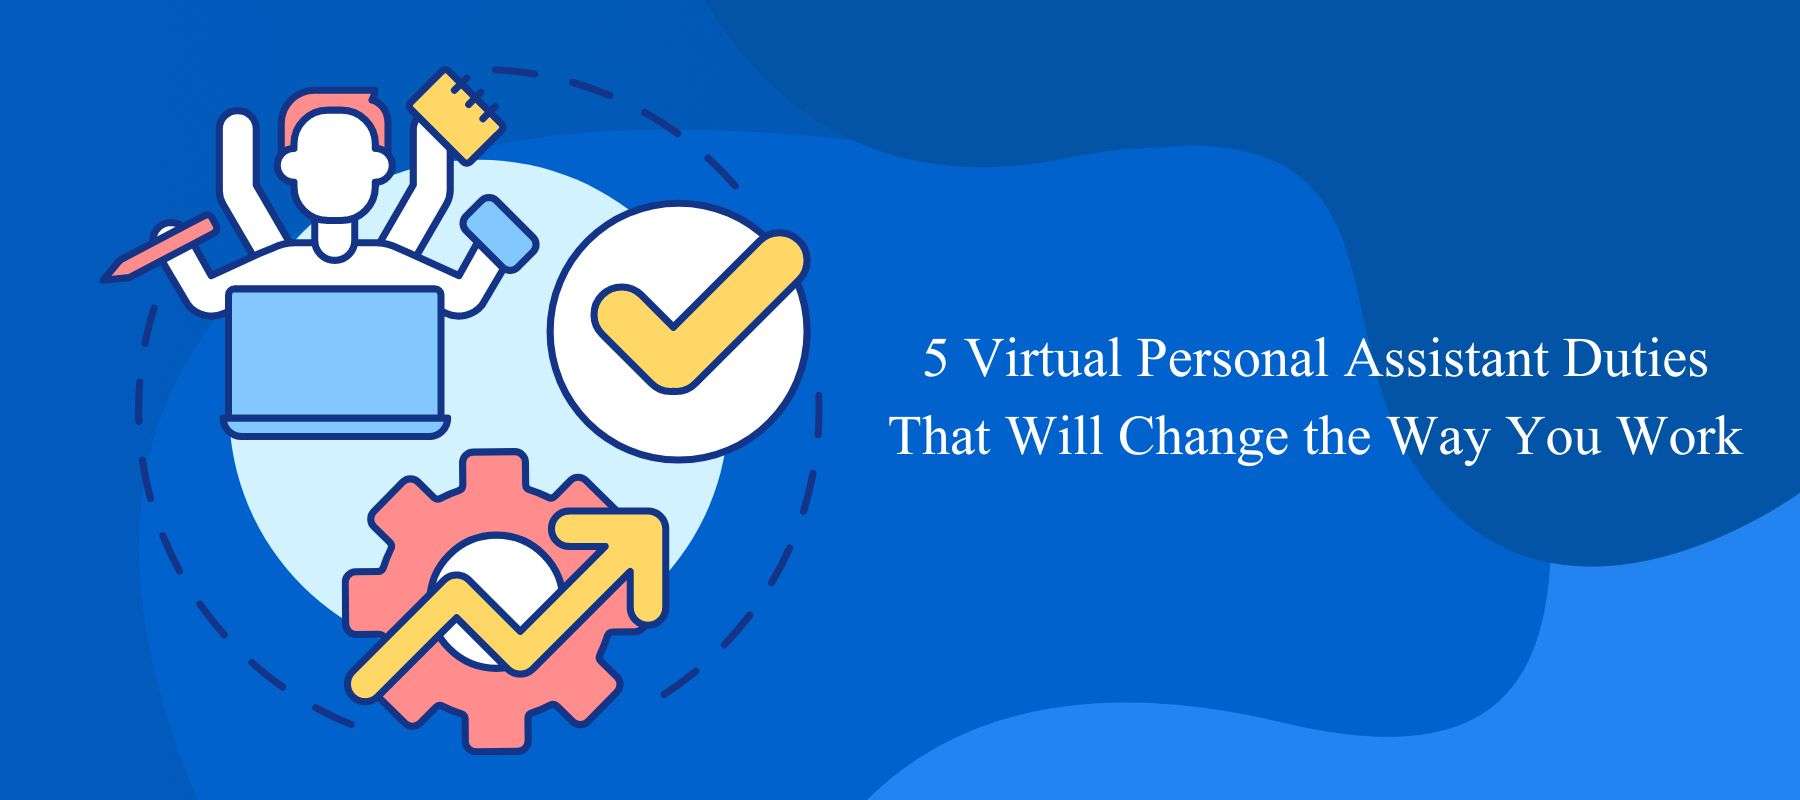 5 Virtual Personal Assistant Duties That Will Change the Way You Work.